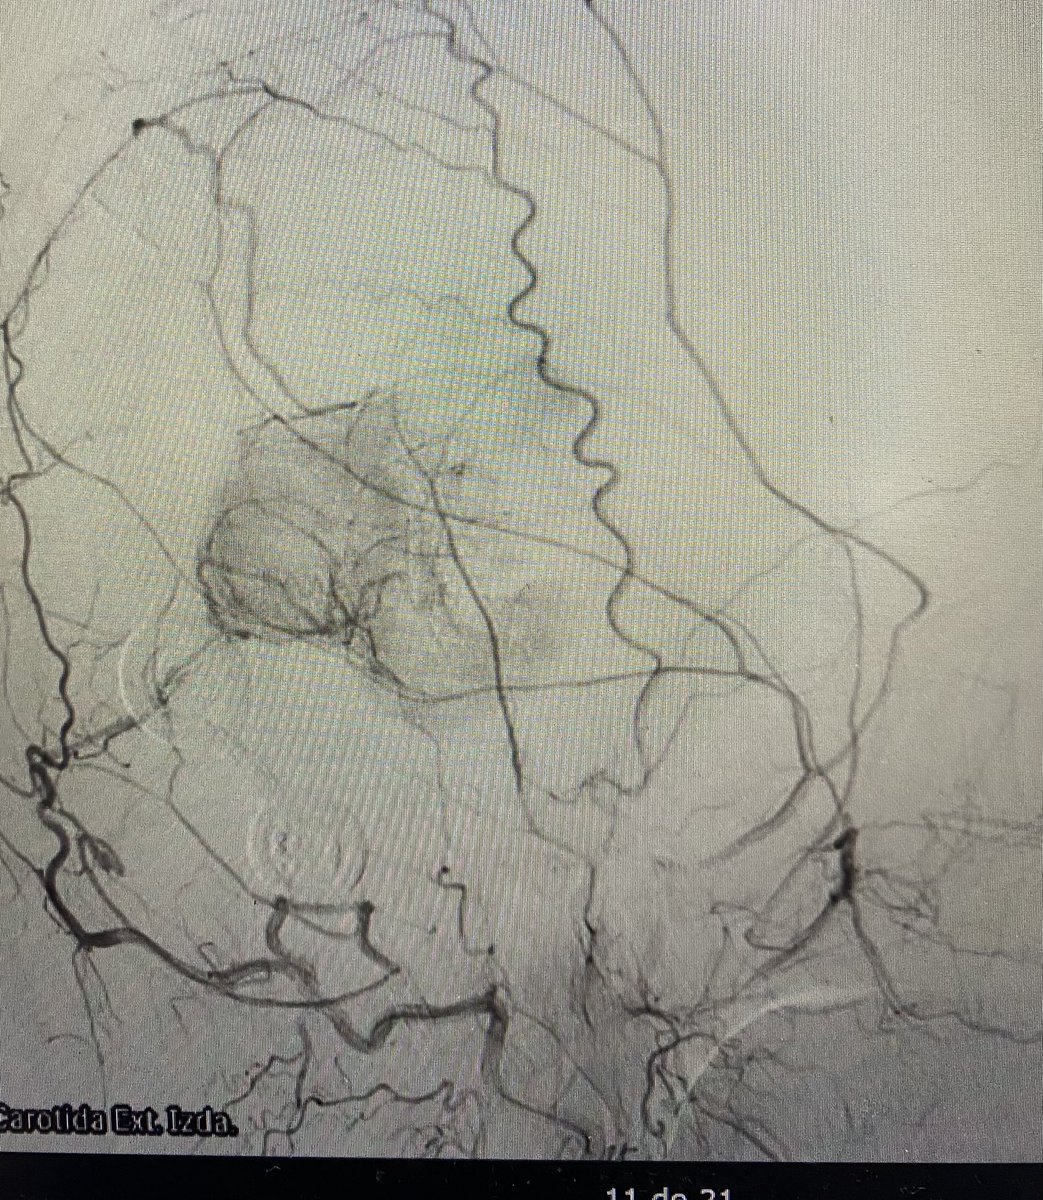 31 y/o male: headache, pineal tumor, and subacute hydrocephalus.Initial surgery: shunt, negative biopsy. InterHempPost approach limited by bleeding, confirming fibrous tumor. Arteriography shows ext. carotid contribution. Planning next step. What now?#neurosurgery #clinicalcase